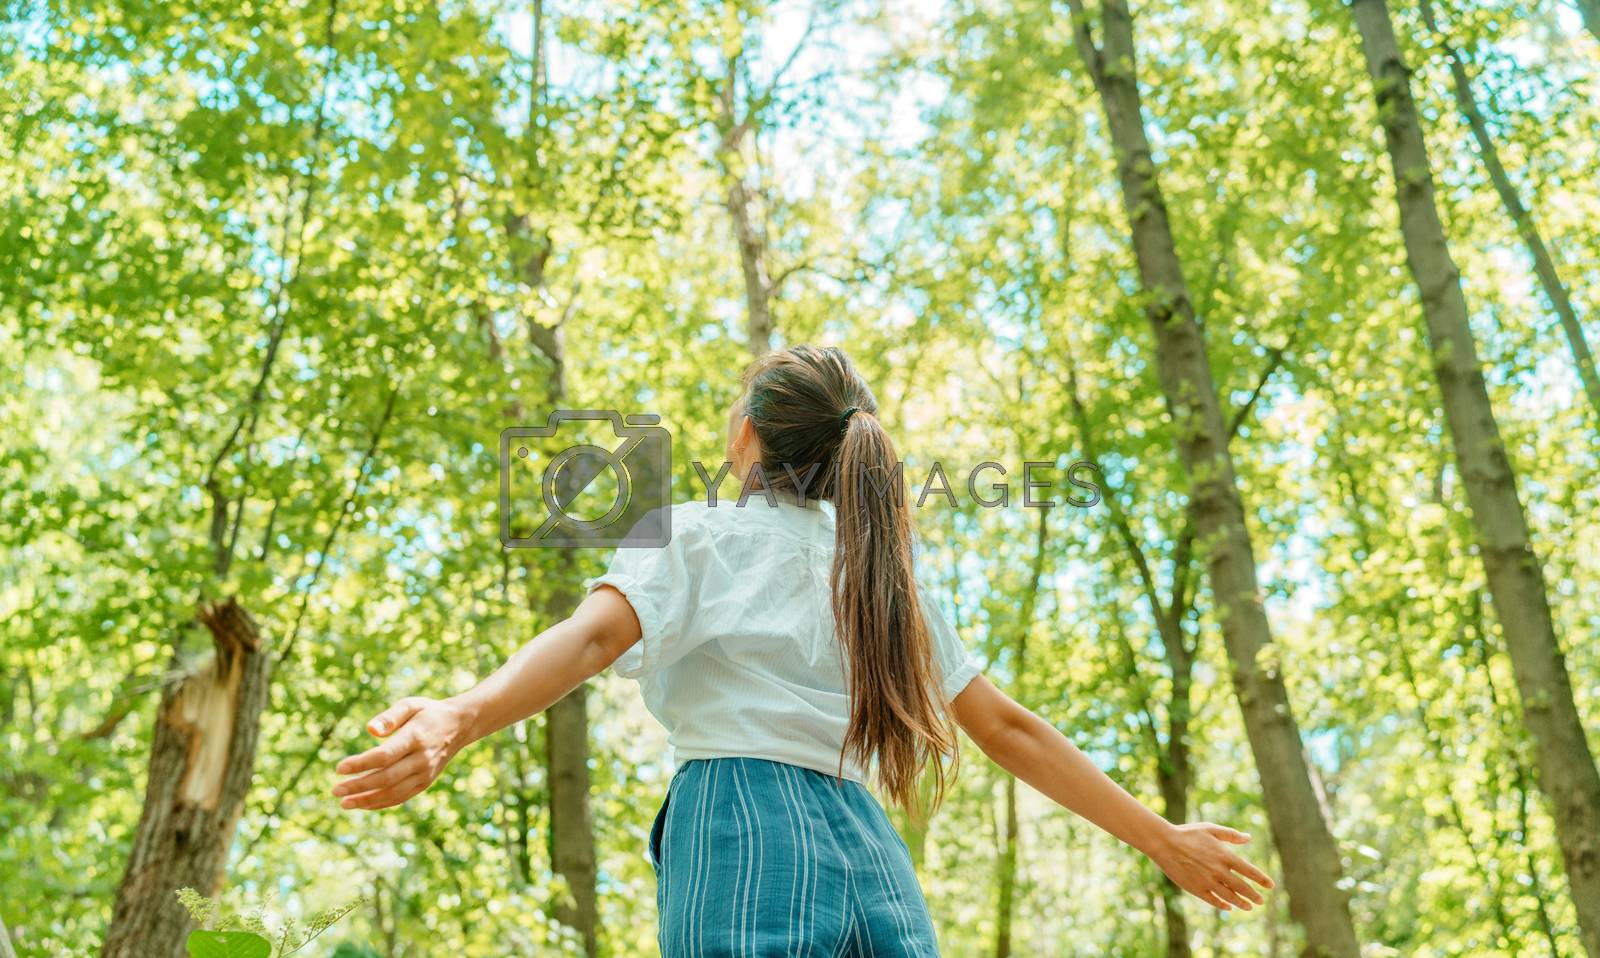 Royalty free image of Free woman breathing clean air in nature forest. Happy girl from the back with open arms in happiness. Fresh outdoor woods, wellness healthy lifestyle concept by Maridav